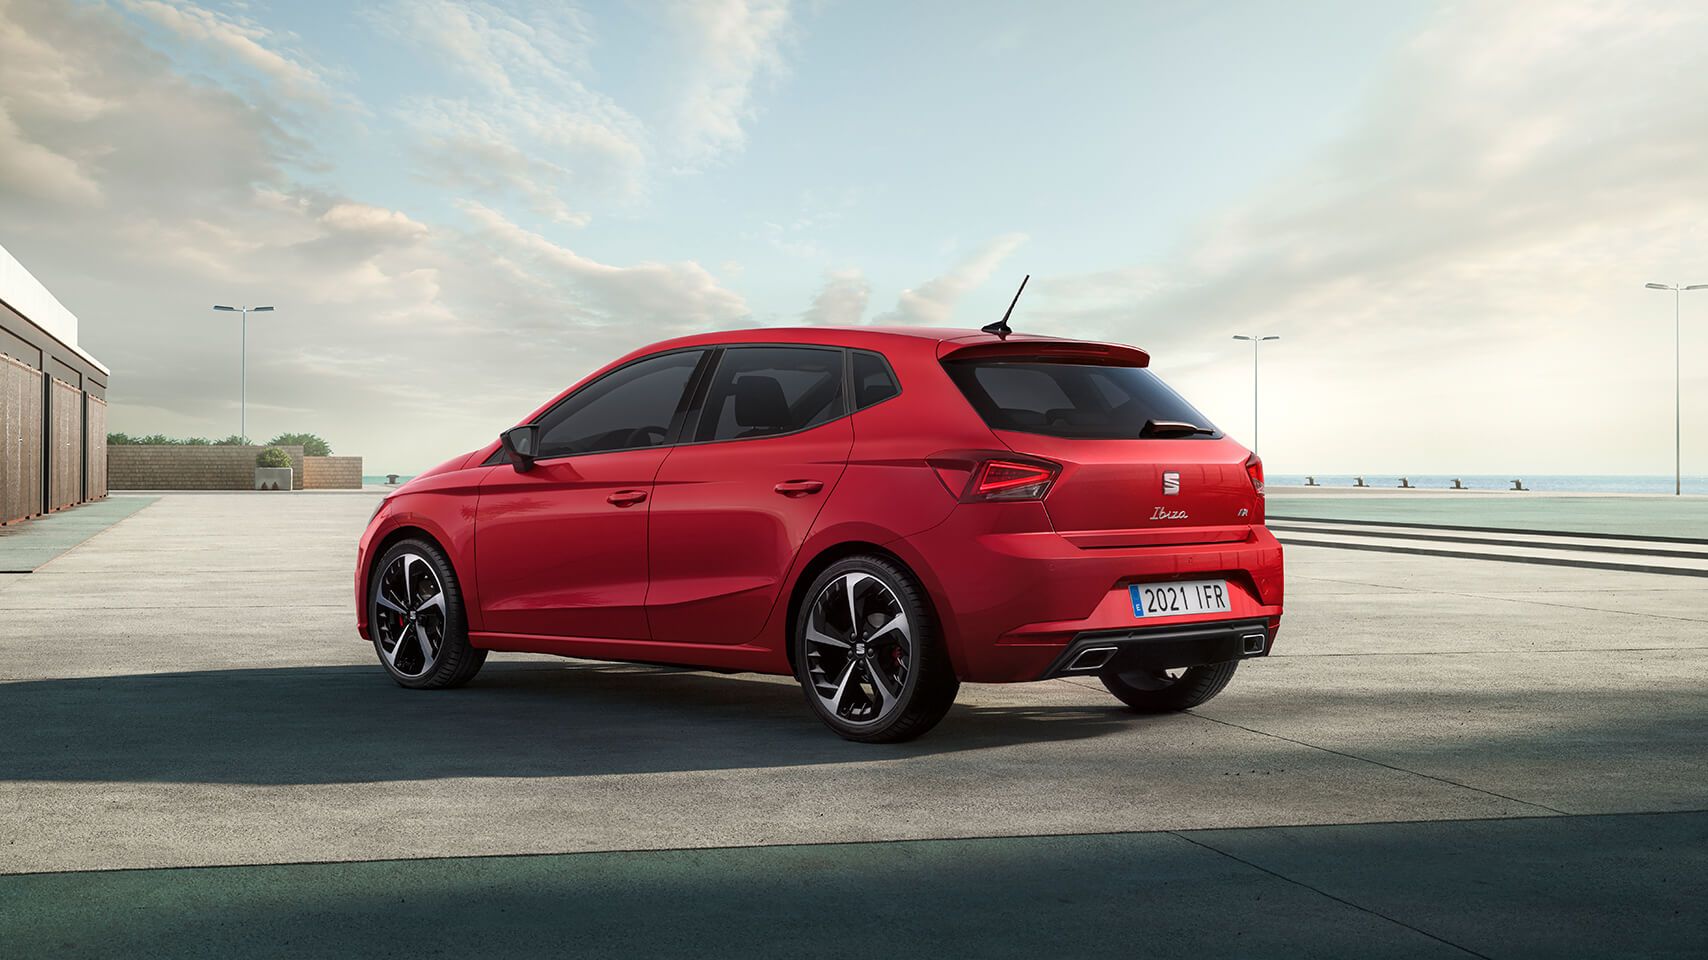 Red SEAT Ibiza exterior rear parked